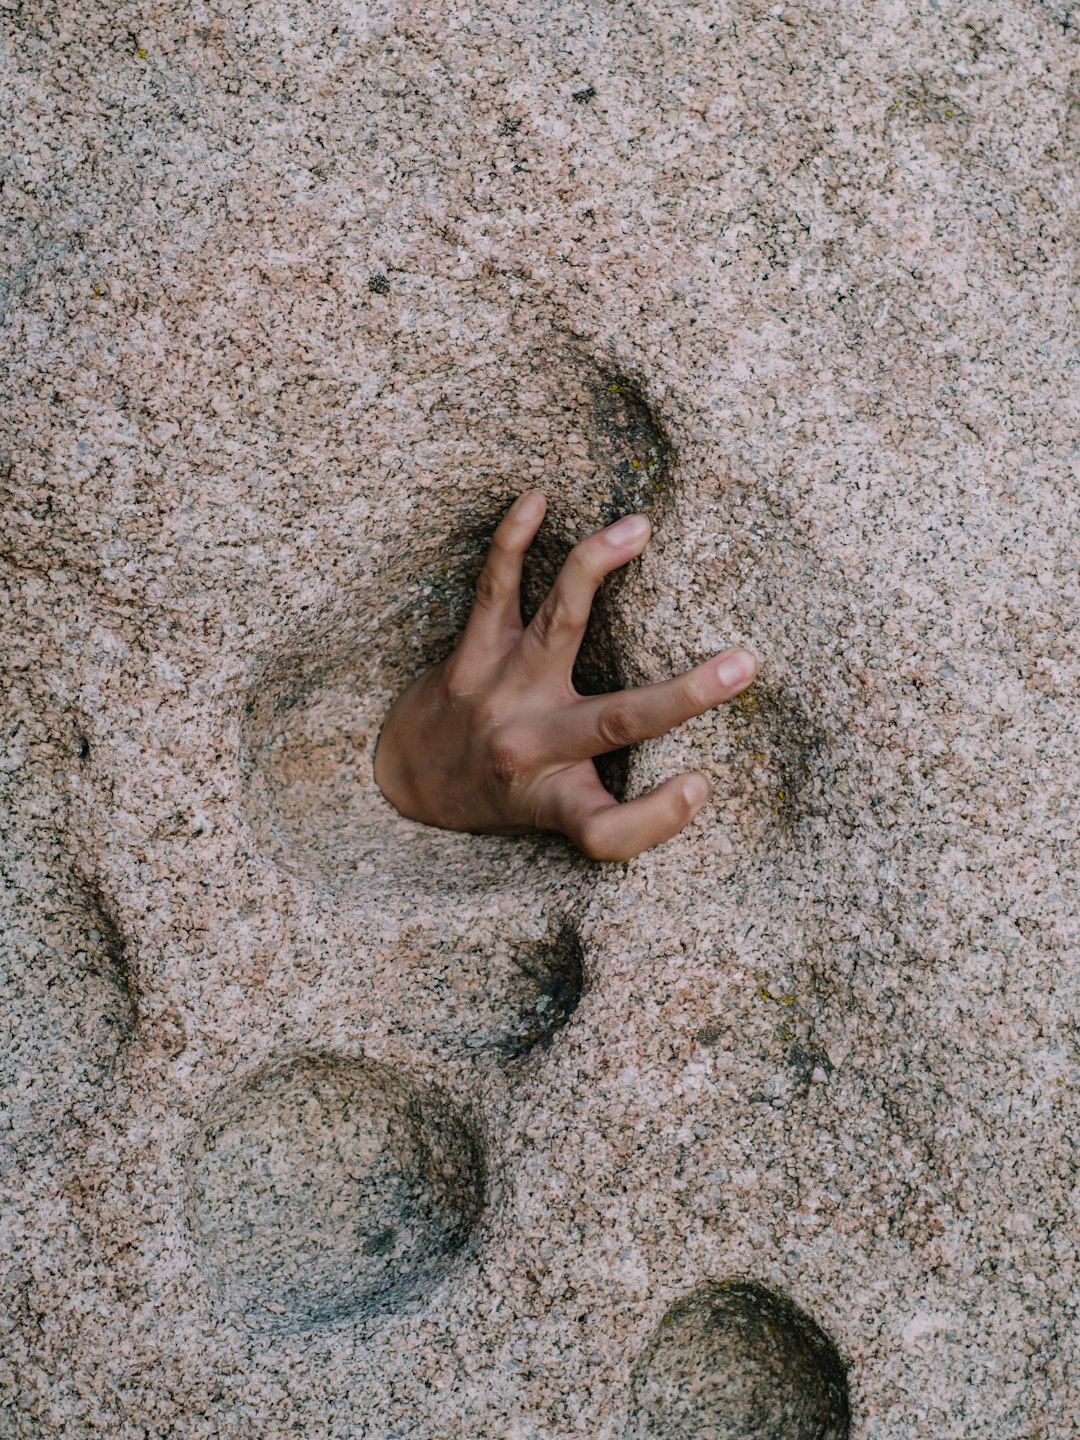 persons left hand on gray sand